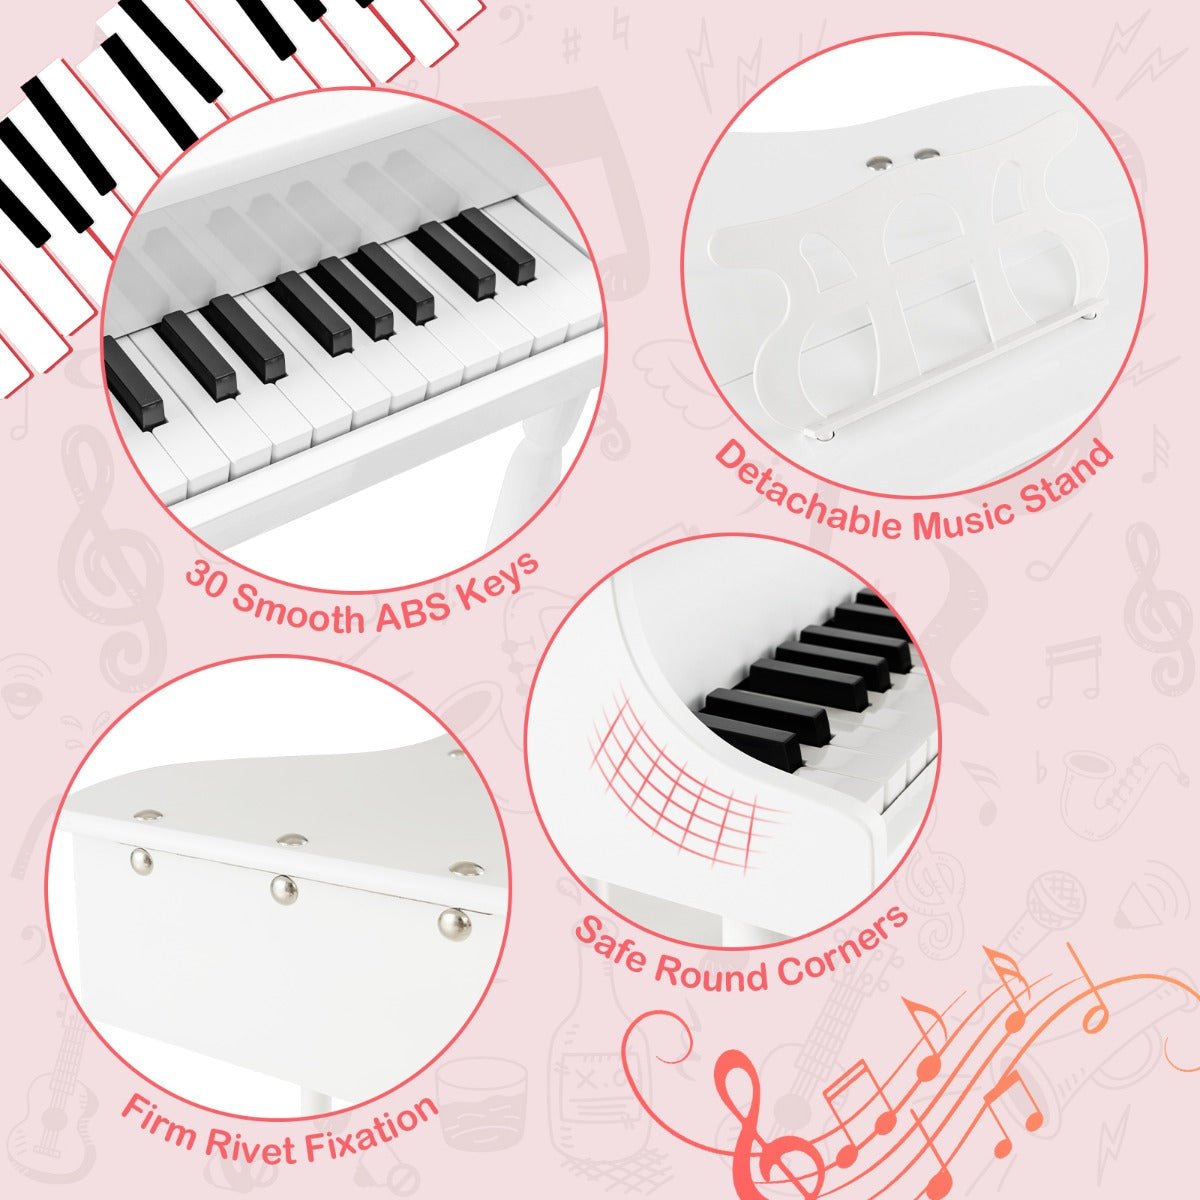 Bring Musical Creativity Home with the White Keyboard